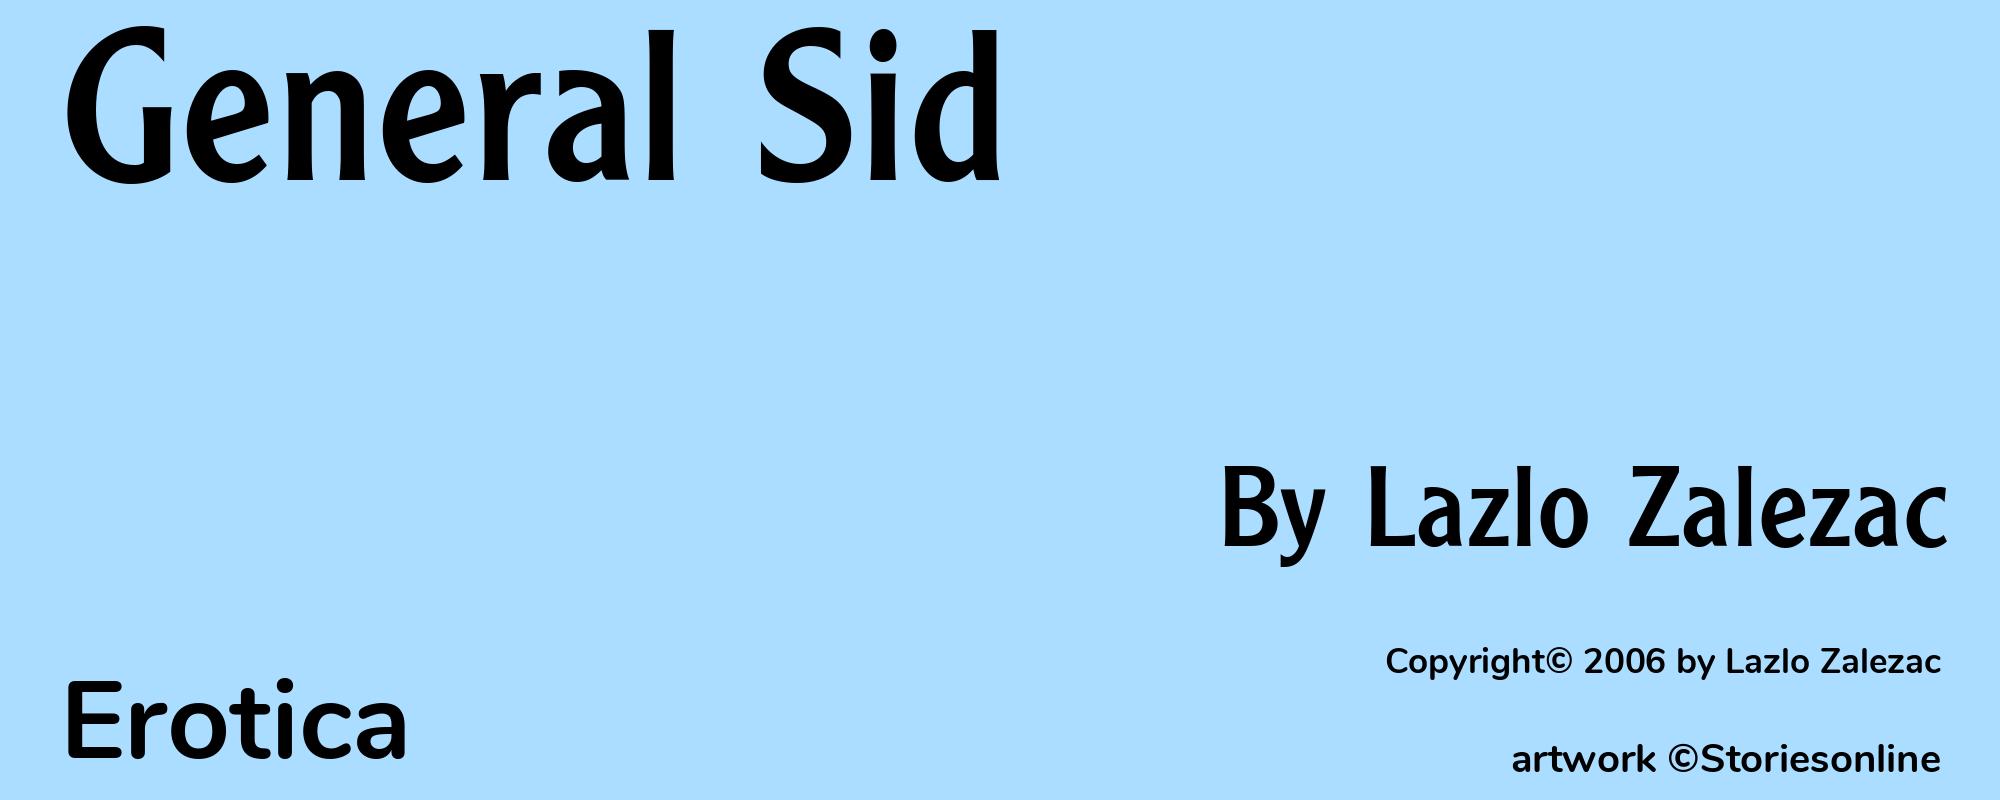 General Sid - Cover